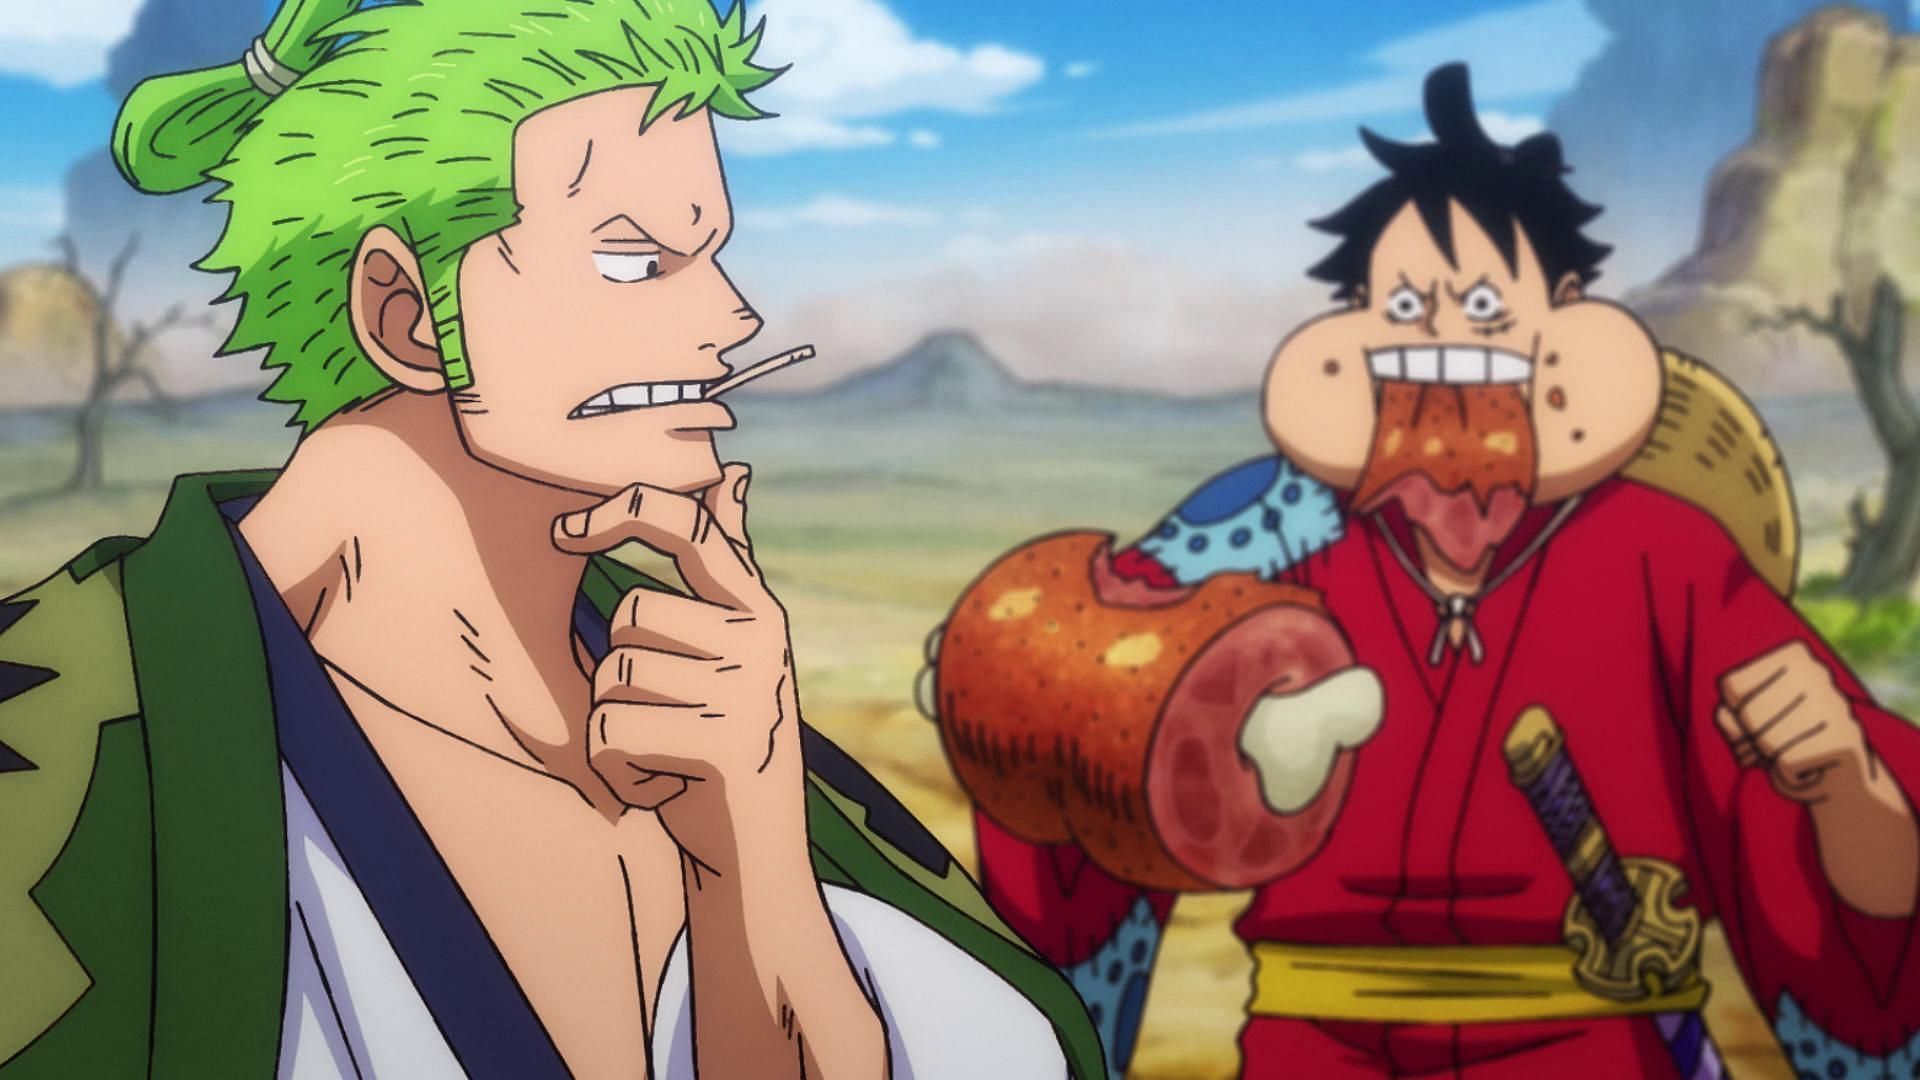 One Piece Chapter 1075: Why Luffy and Zoro are likely to team up with Lucci and Kaku, explained (Image via Toei Animation)